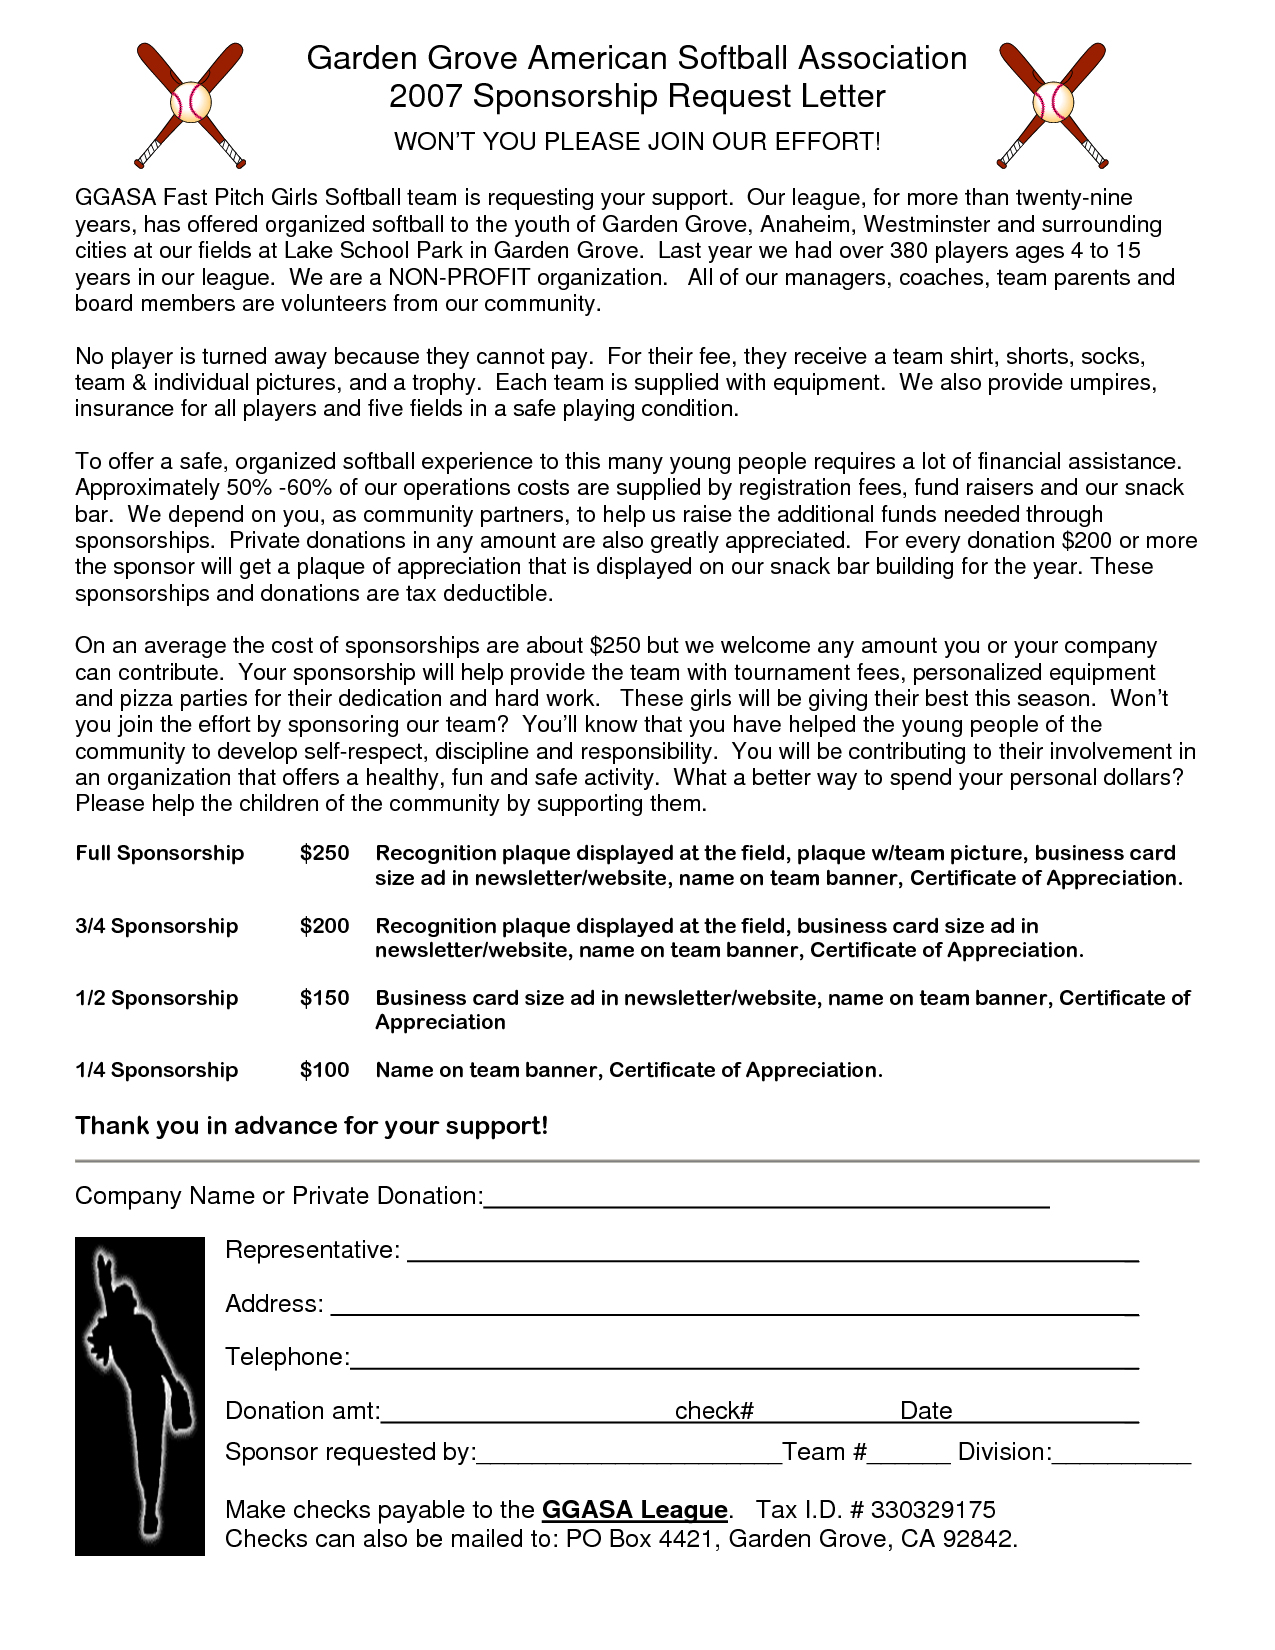 Fundraising Letter Template for Sports Teams - Sponsorship form Template